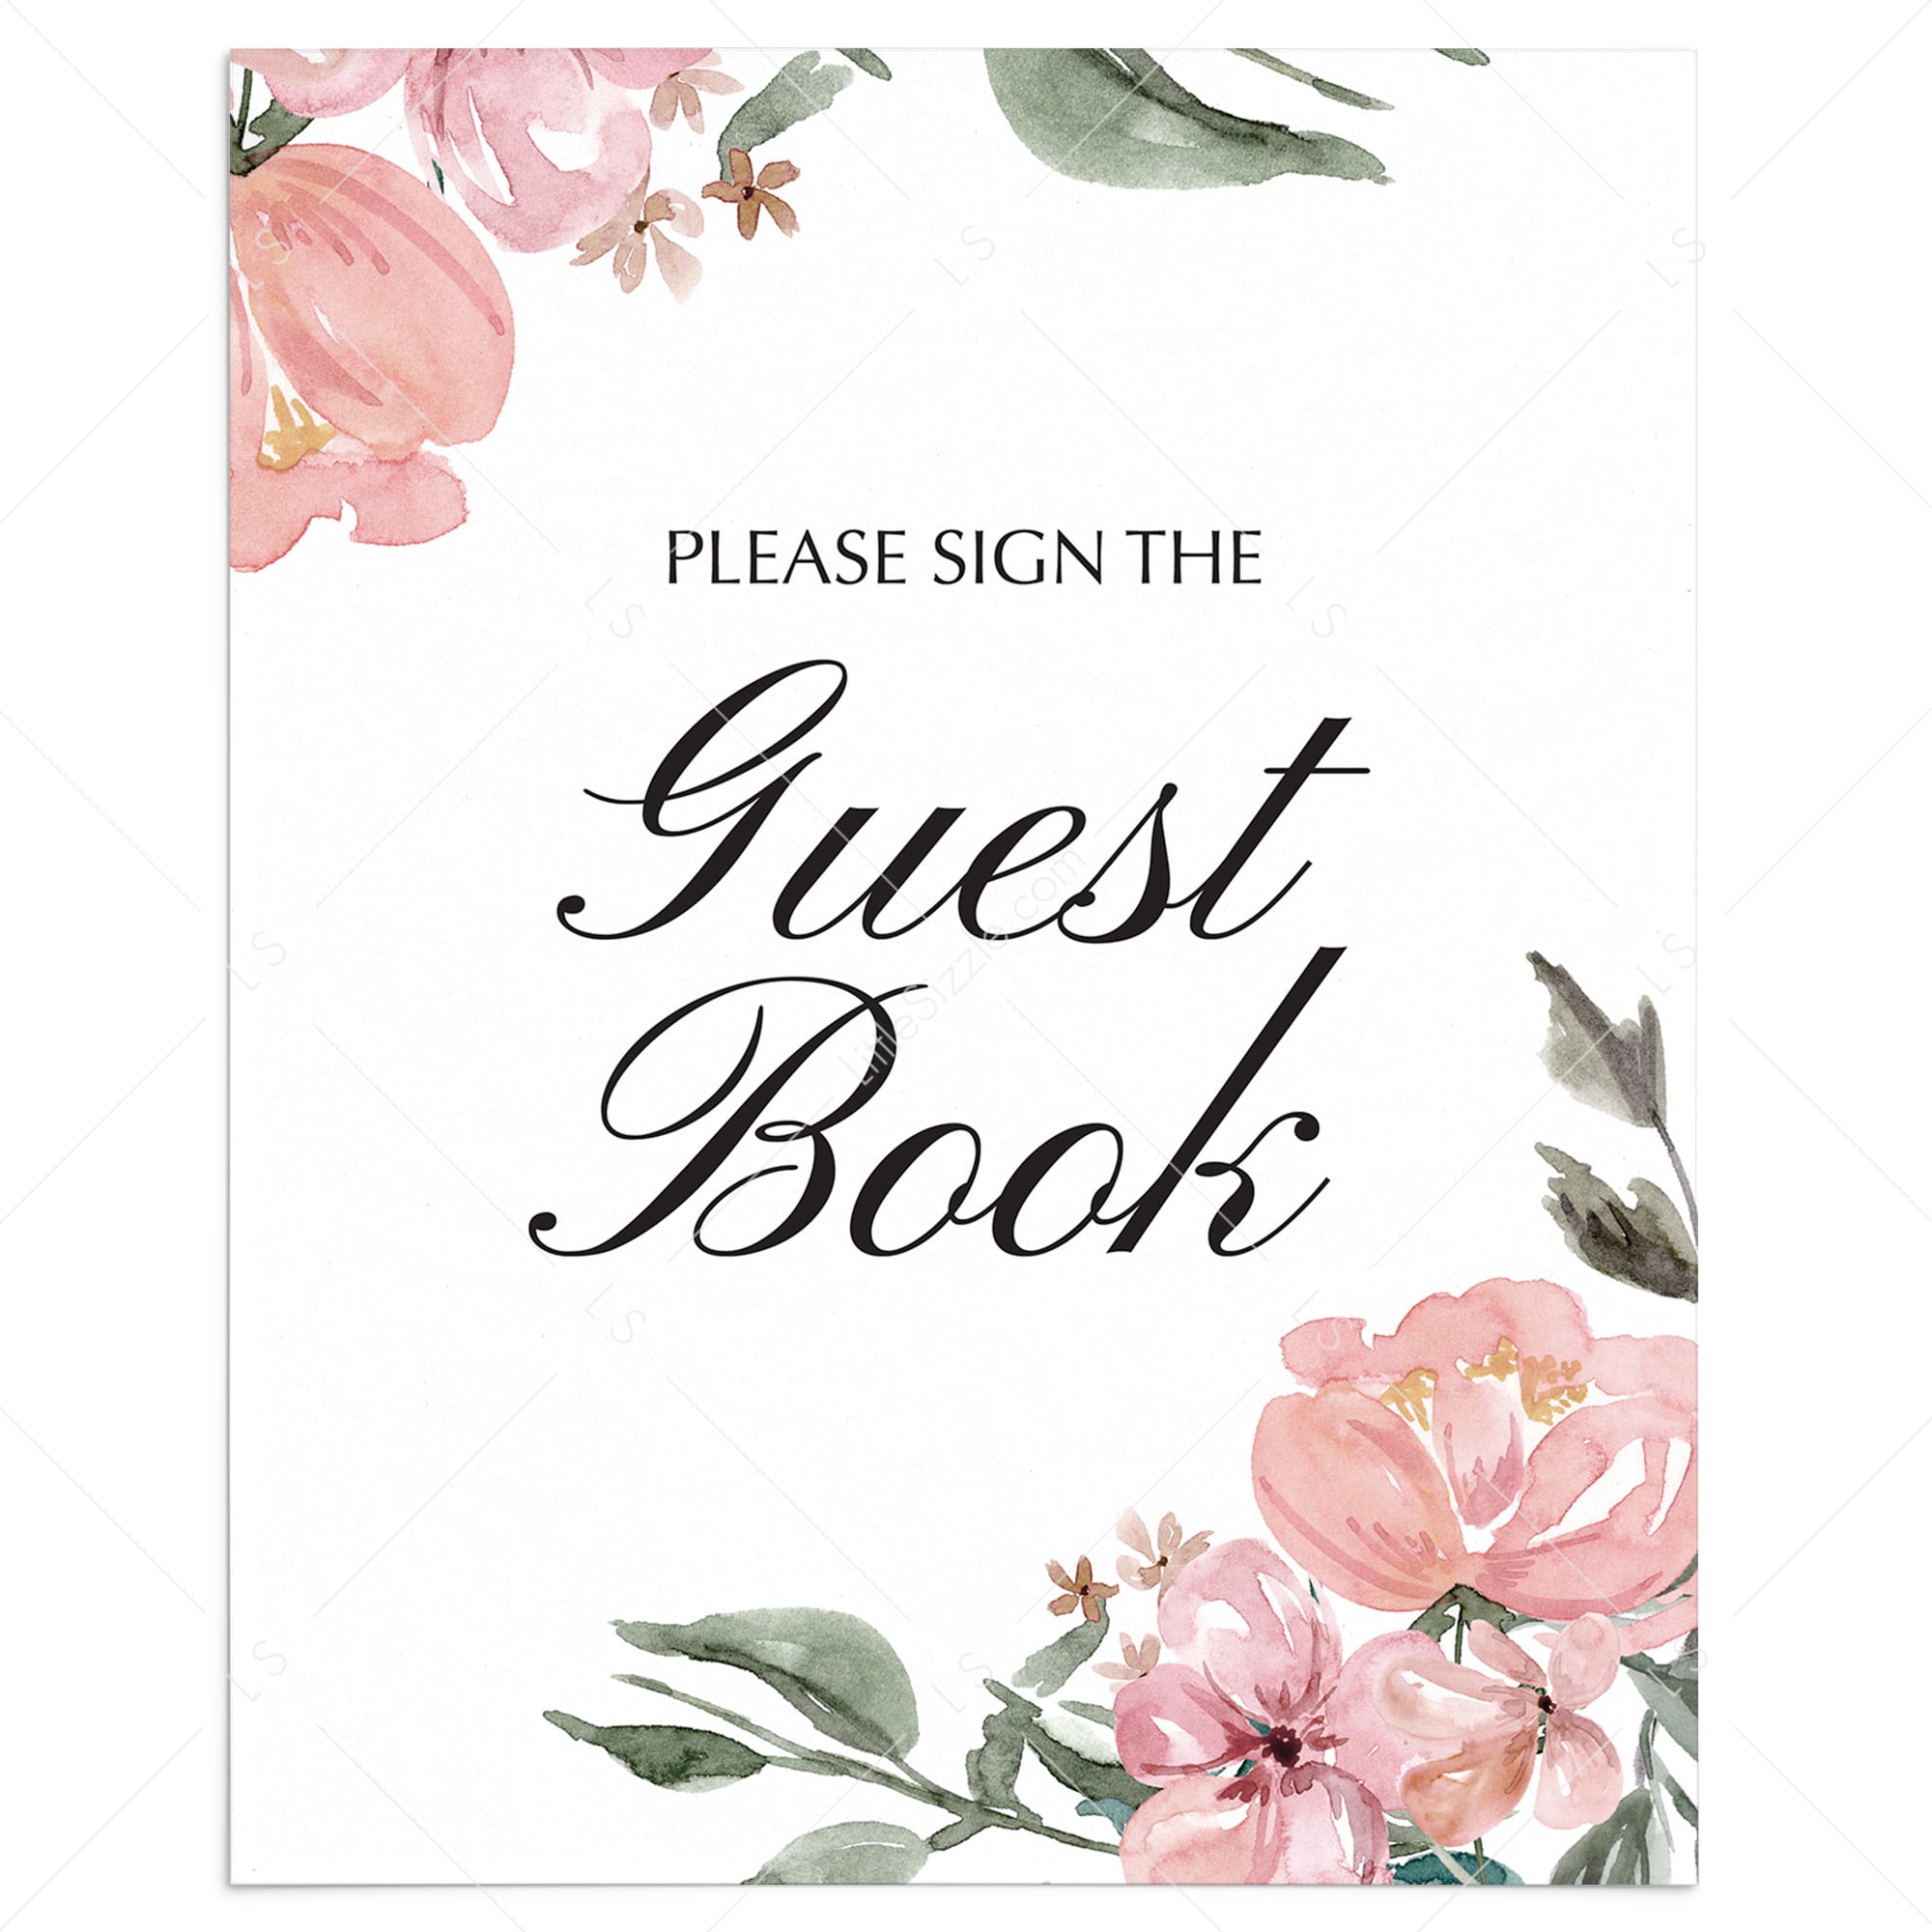 Whimsical guest book table sign printable by LittleSizzle